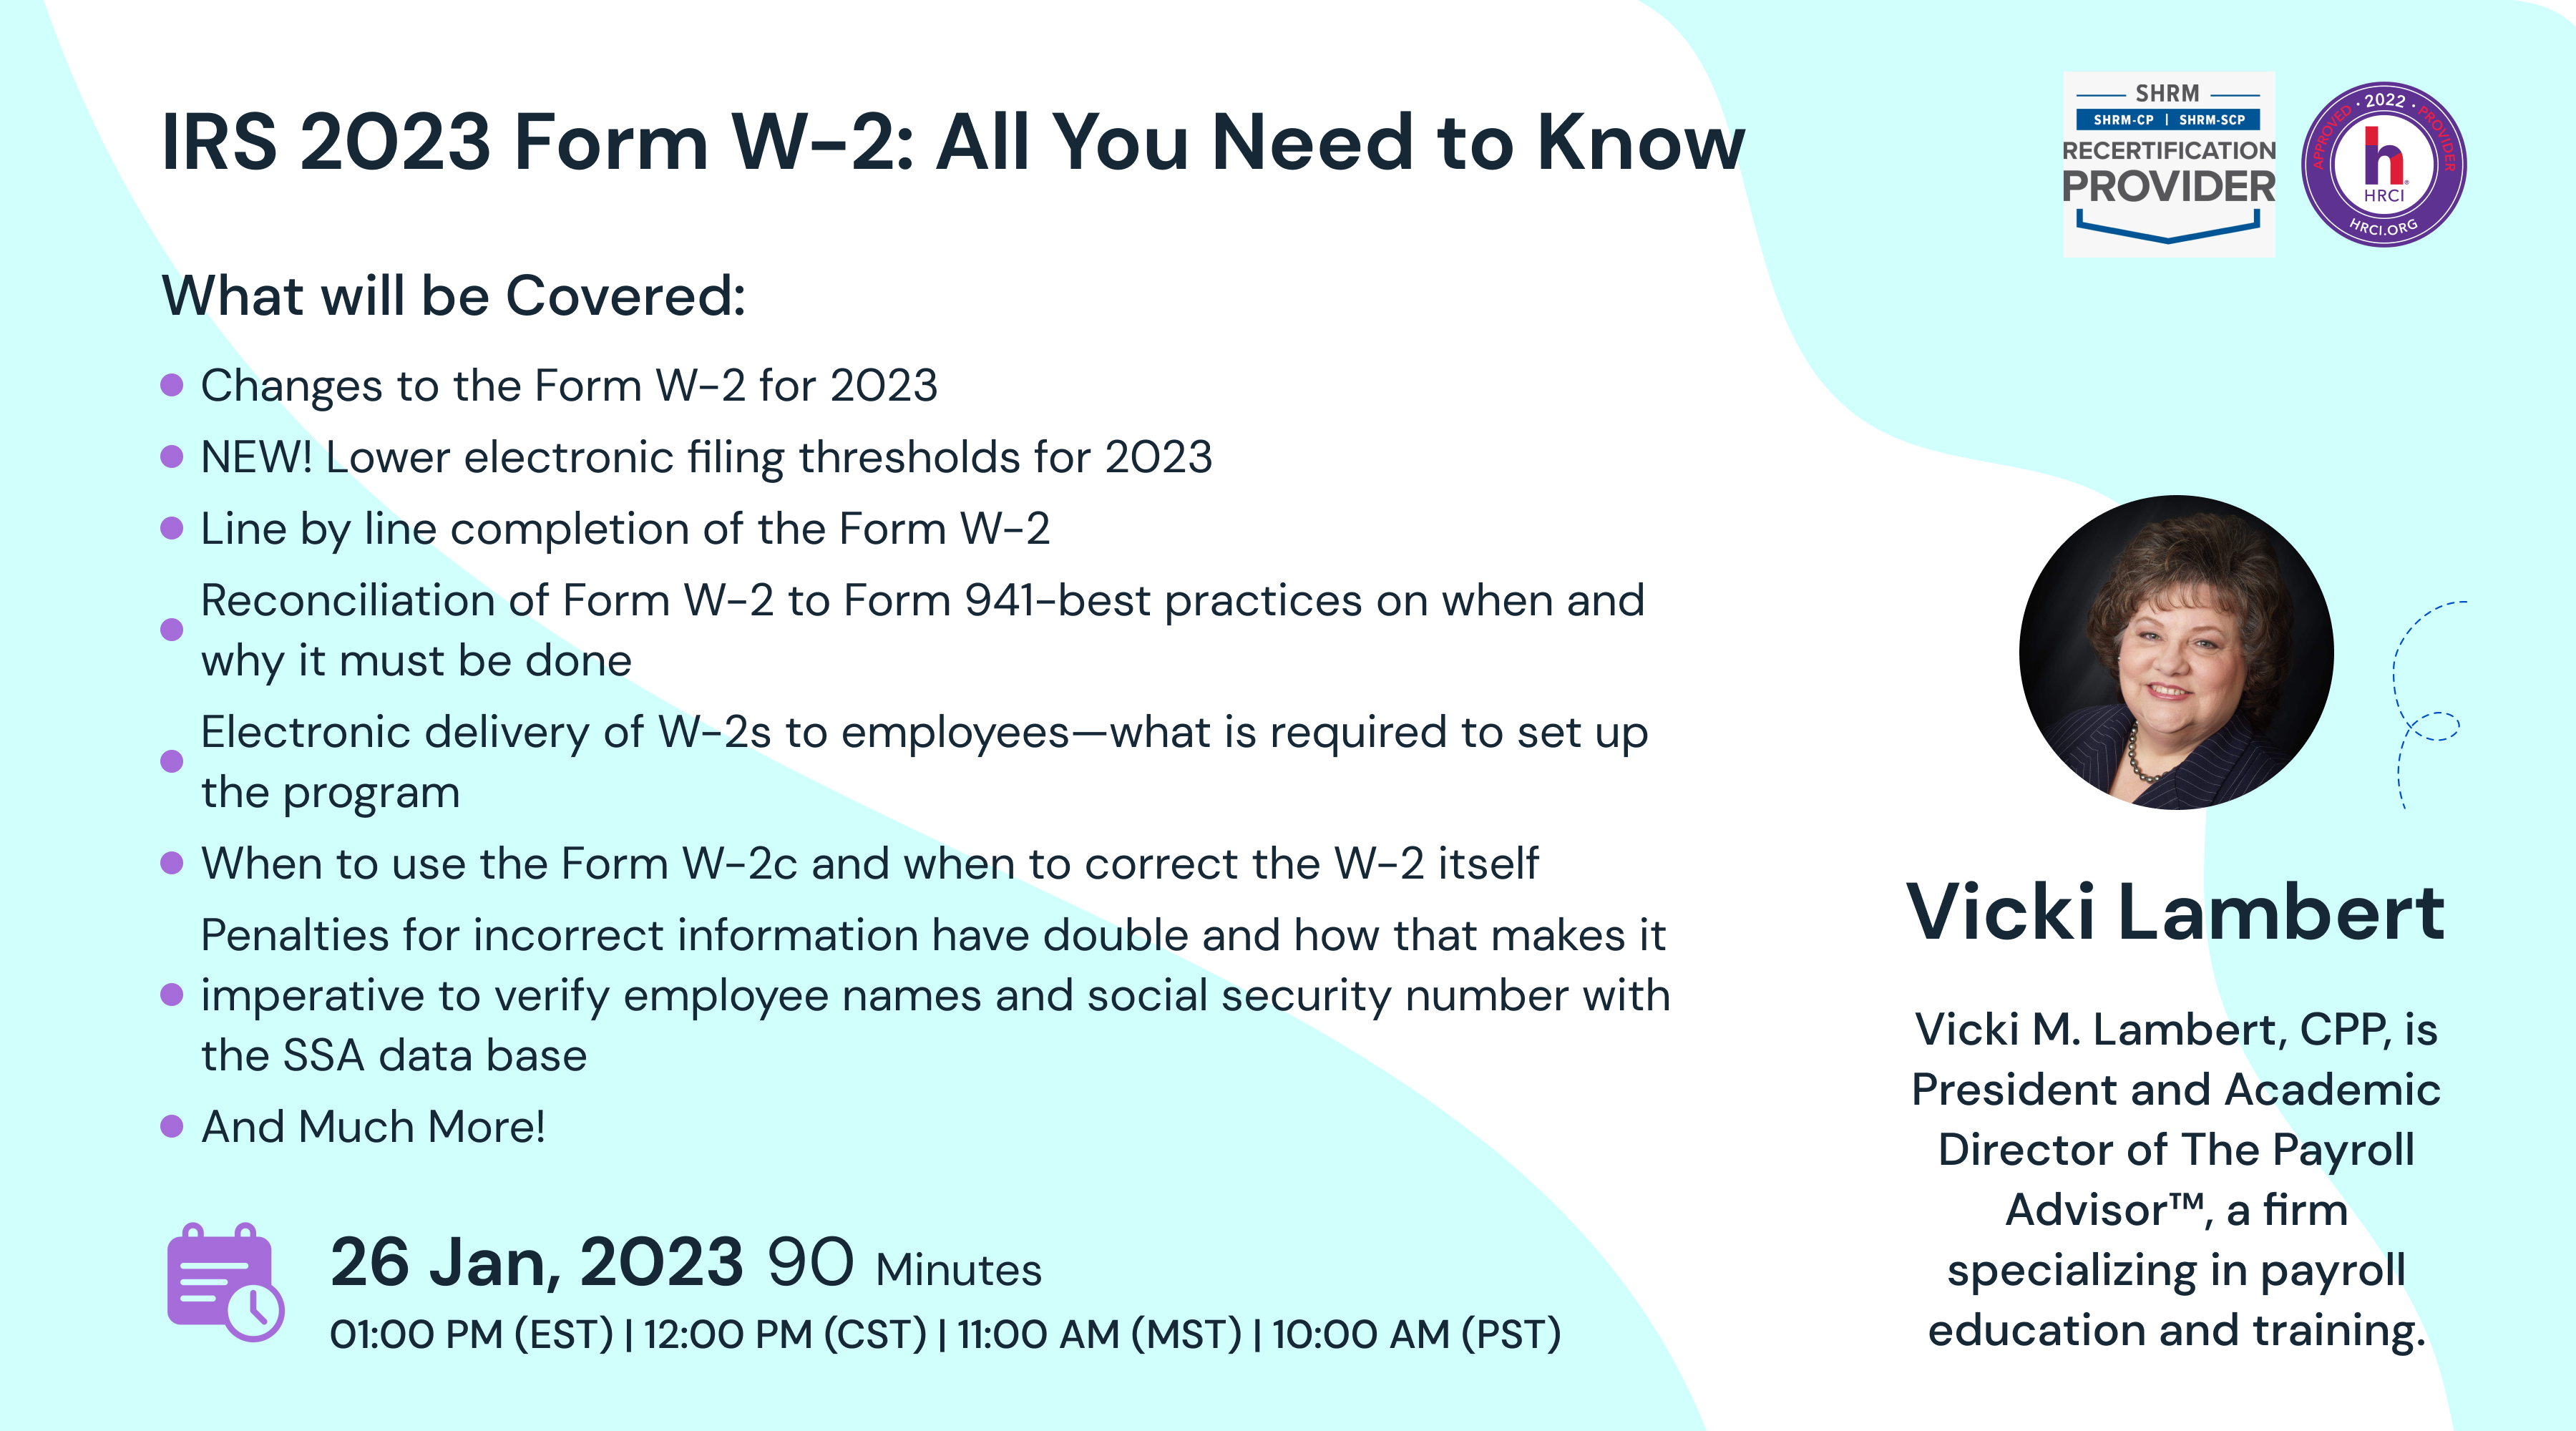 IRS 2023 Form W-2: All You Need to Know